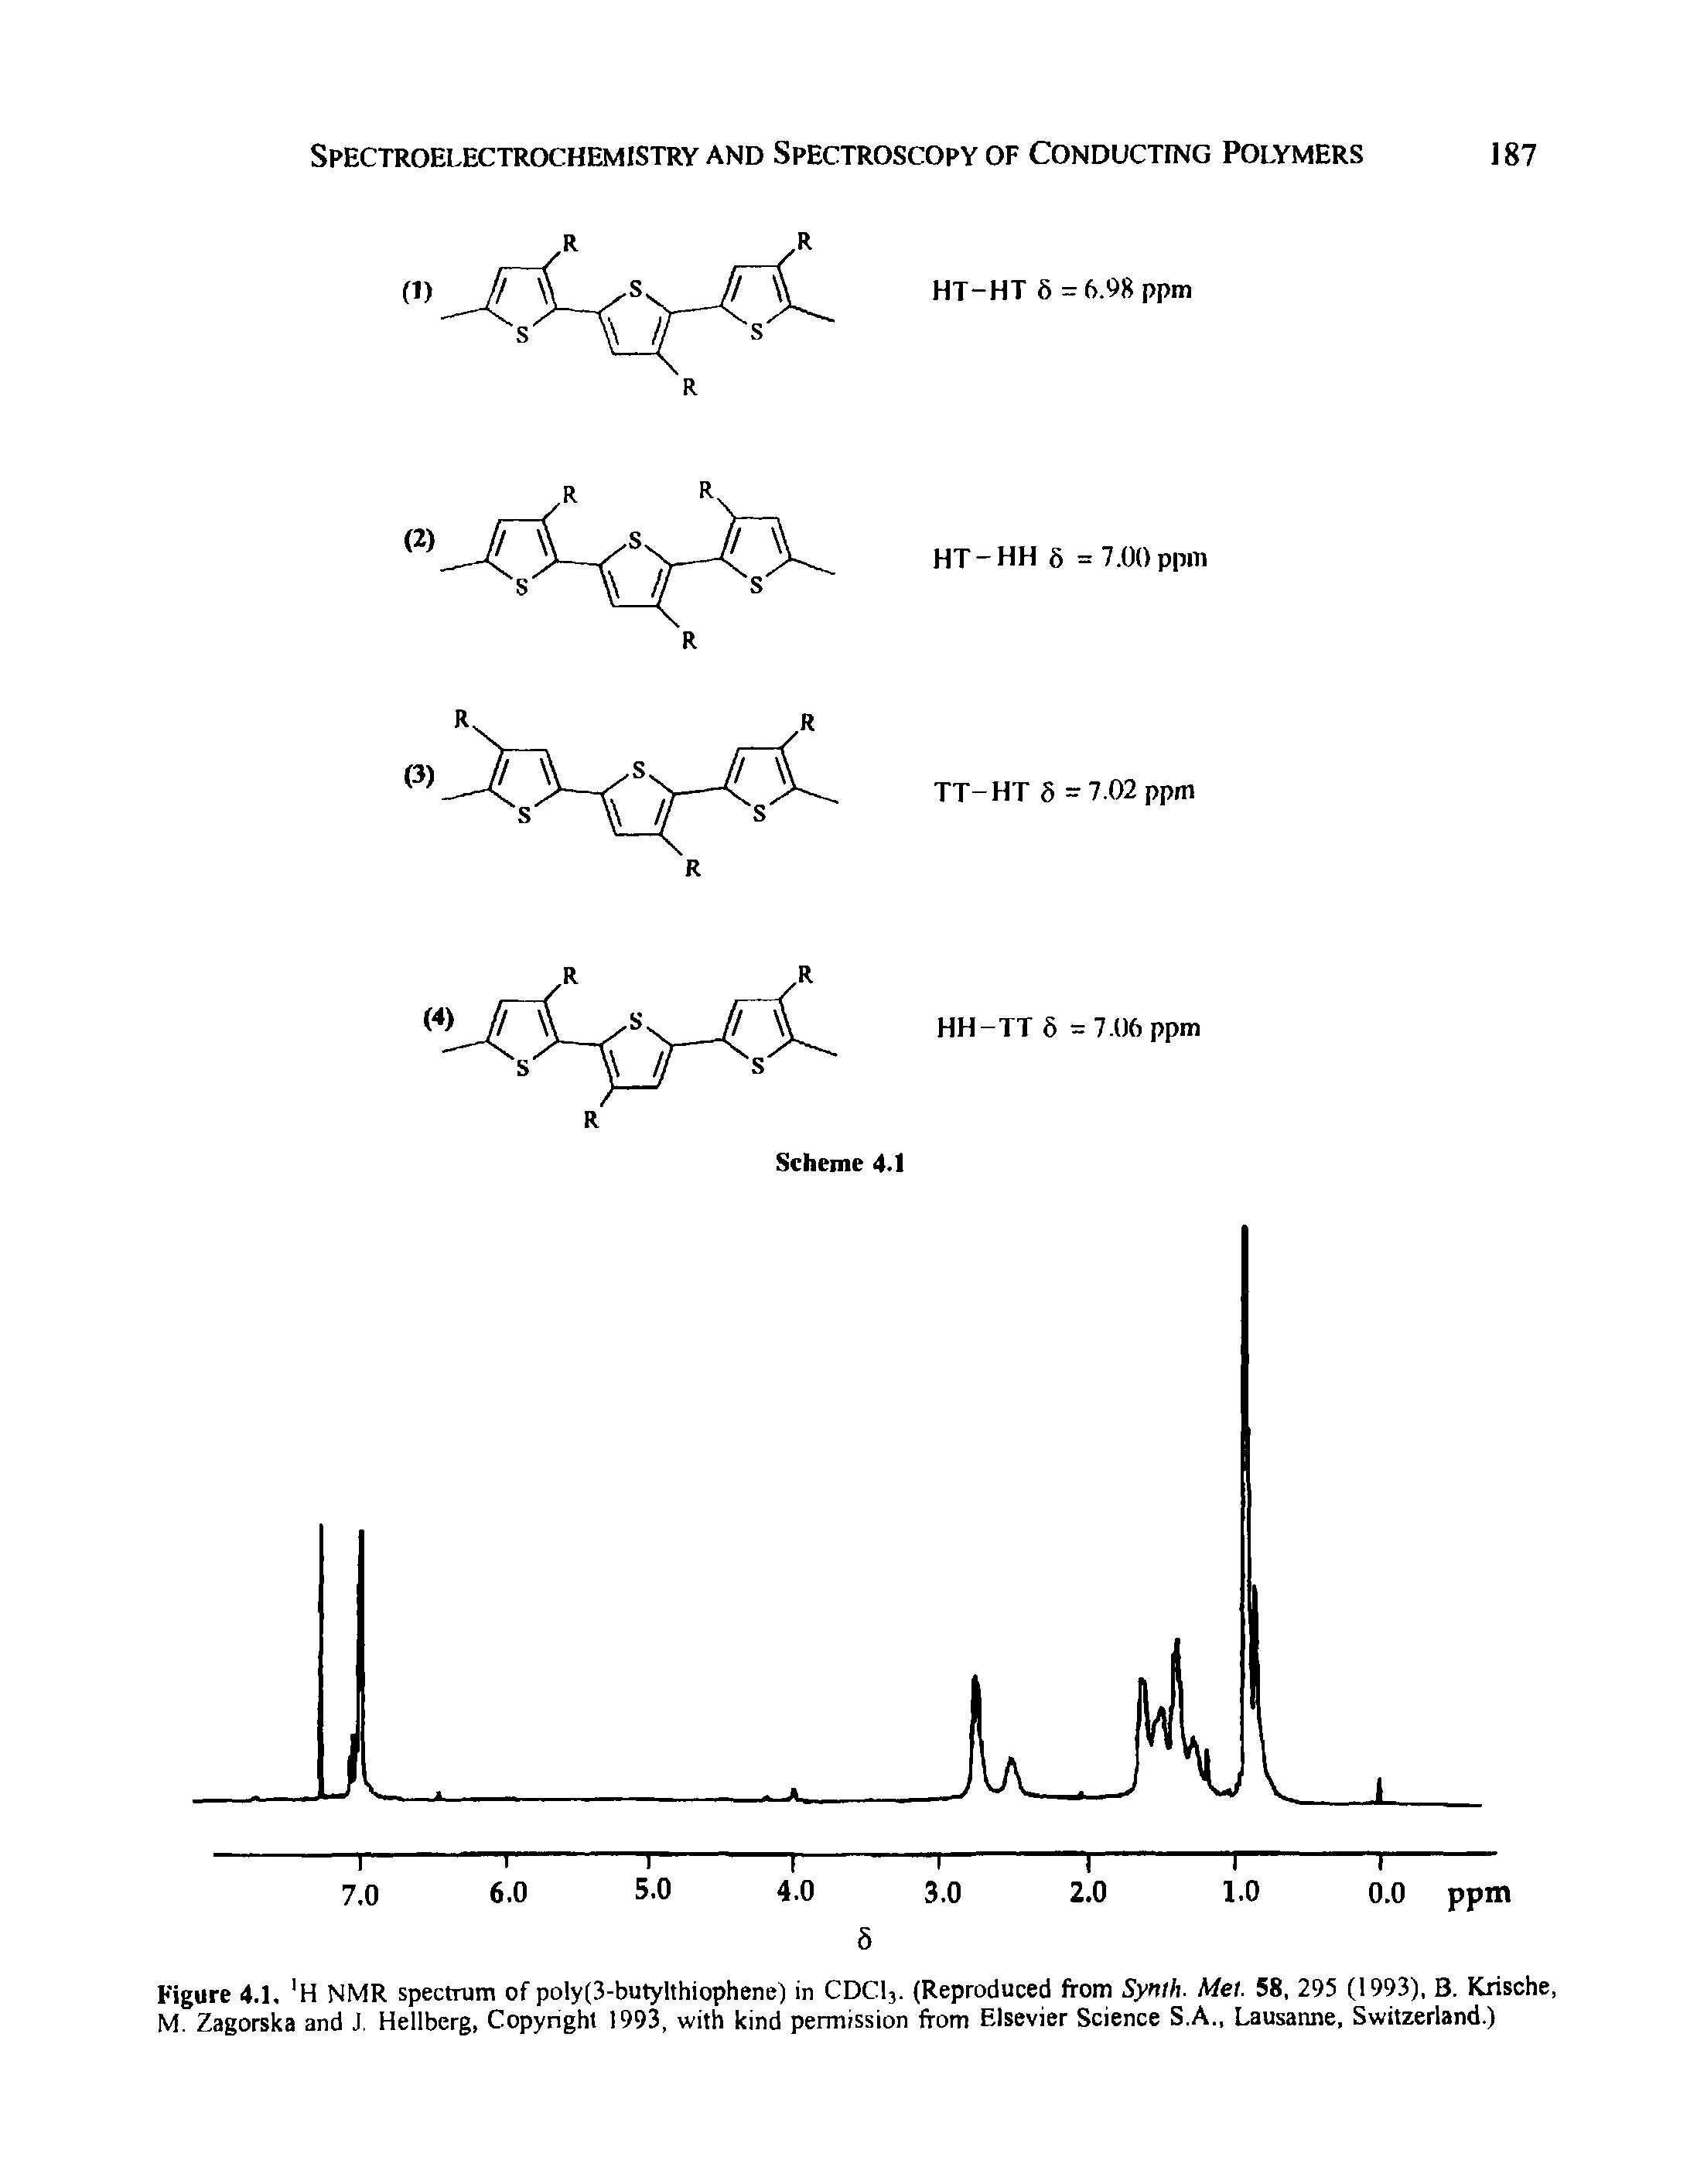 Figure 4.1. H NMR spectrum of poly(3-butylthiophene) in CDCI3. (Reproduced from Synih. Mel. 58, 295 (1993), B. Krische, M. Zagorska and J, Hellberg, Copynght 1993, with kind permission from Elsevier Science S.A., Lausanne. Switzerland.)...